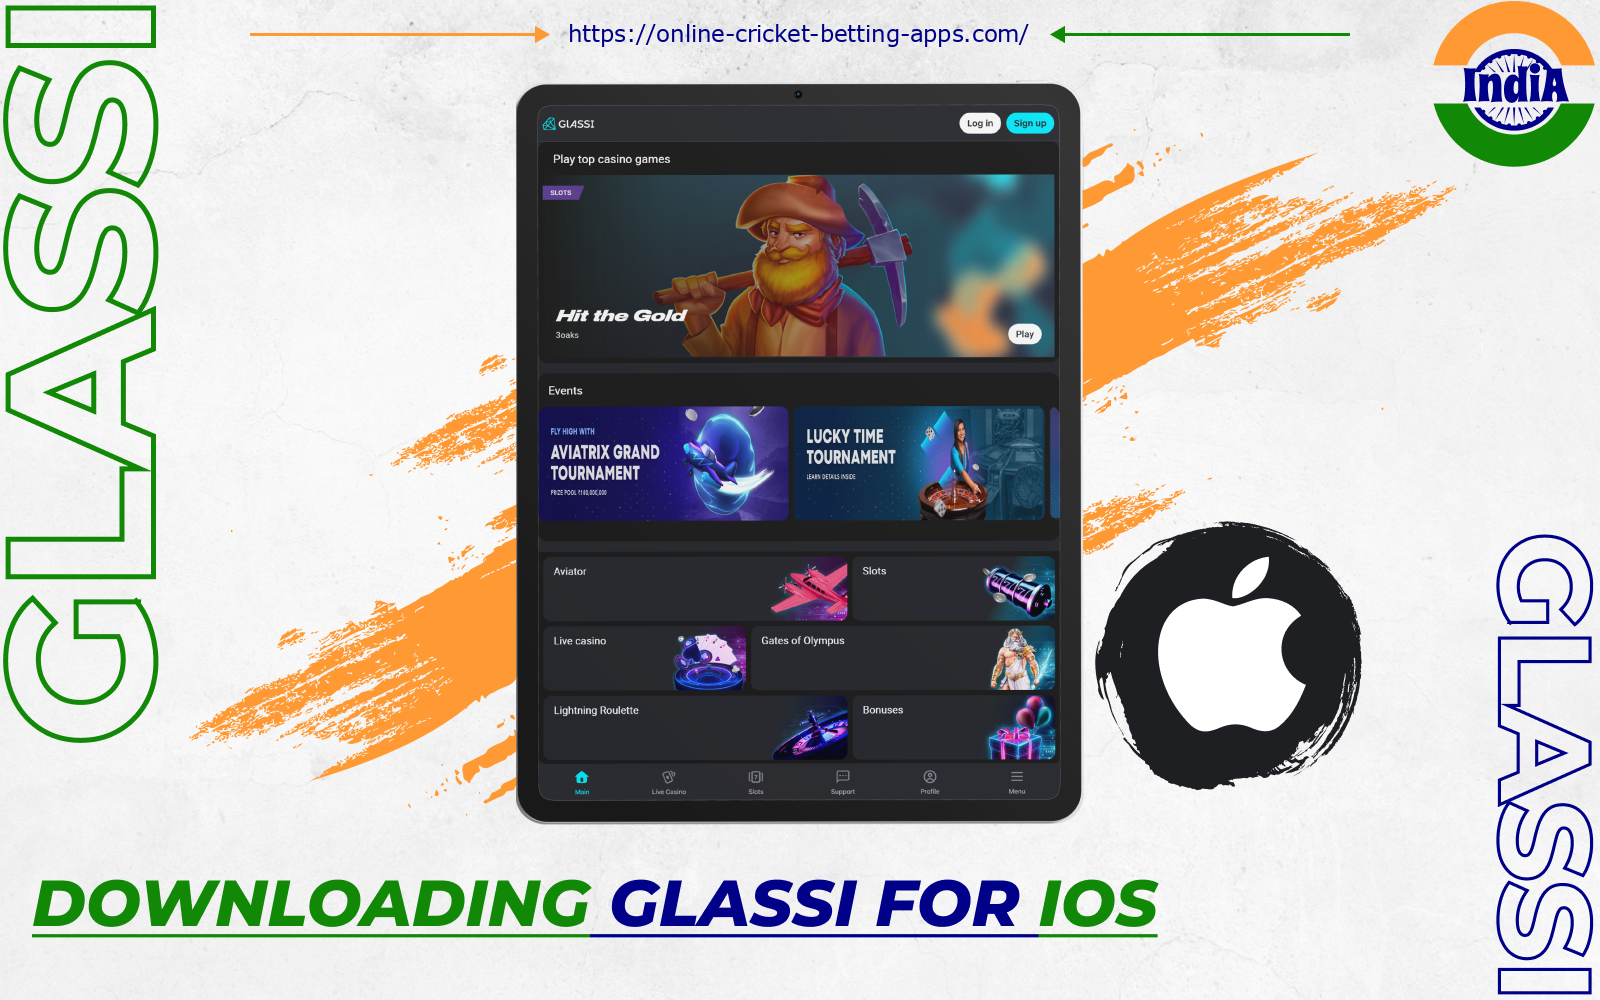 Glassi Casino has a user-friendly and functional app for Indian players on iOS